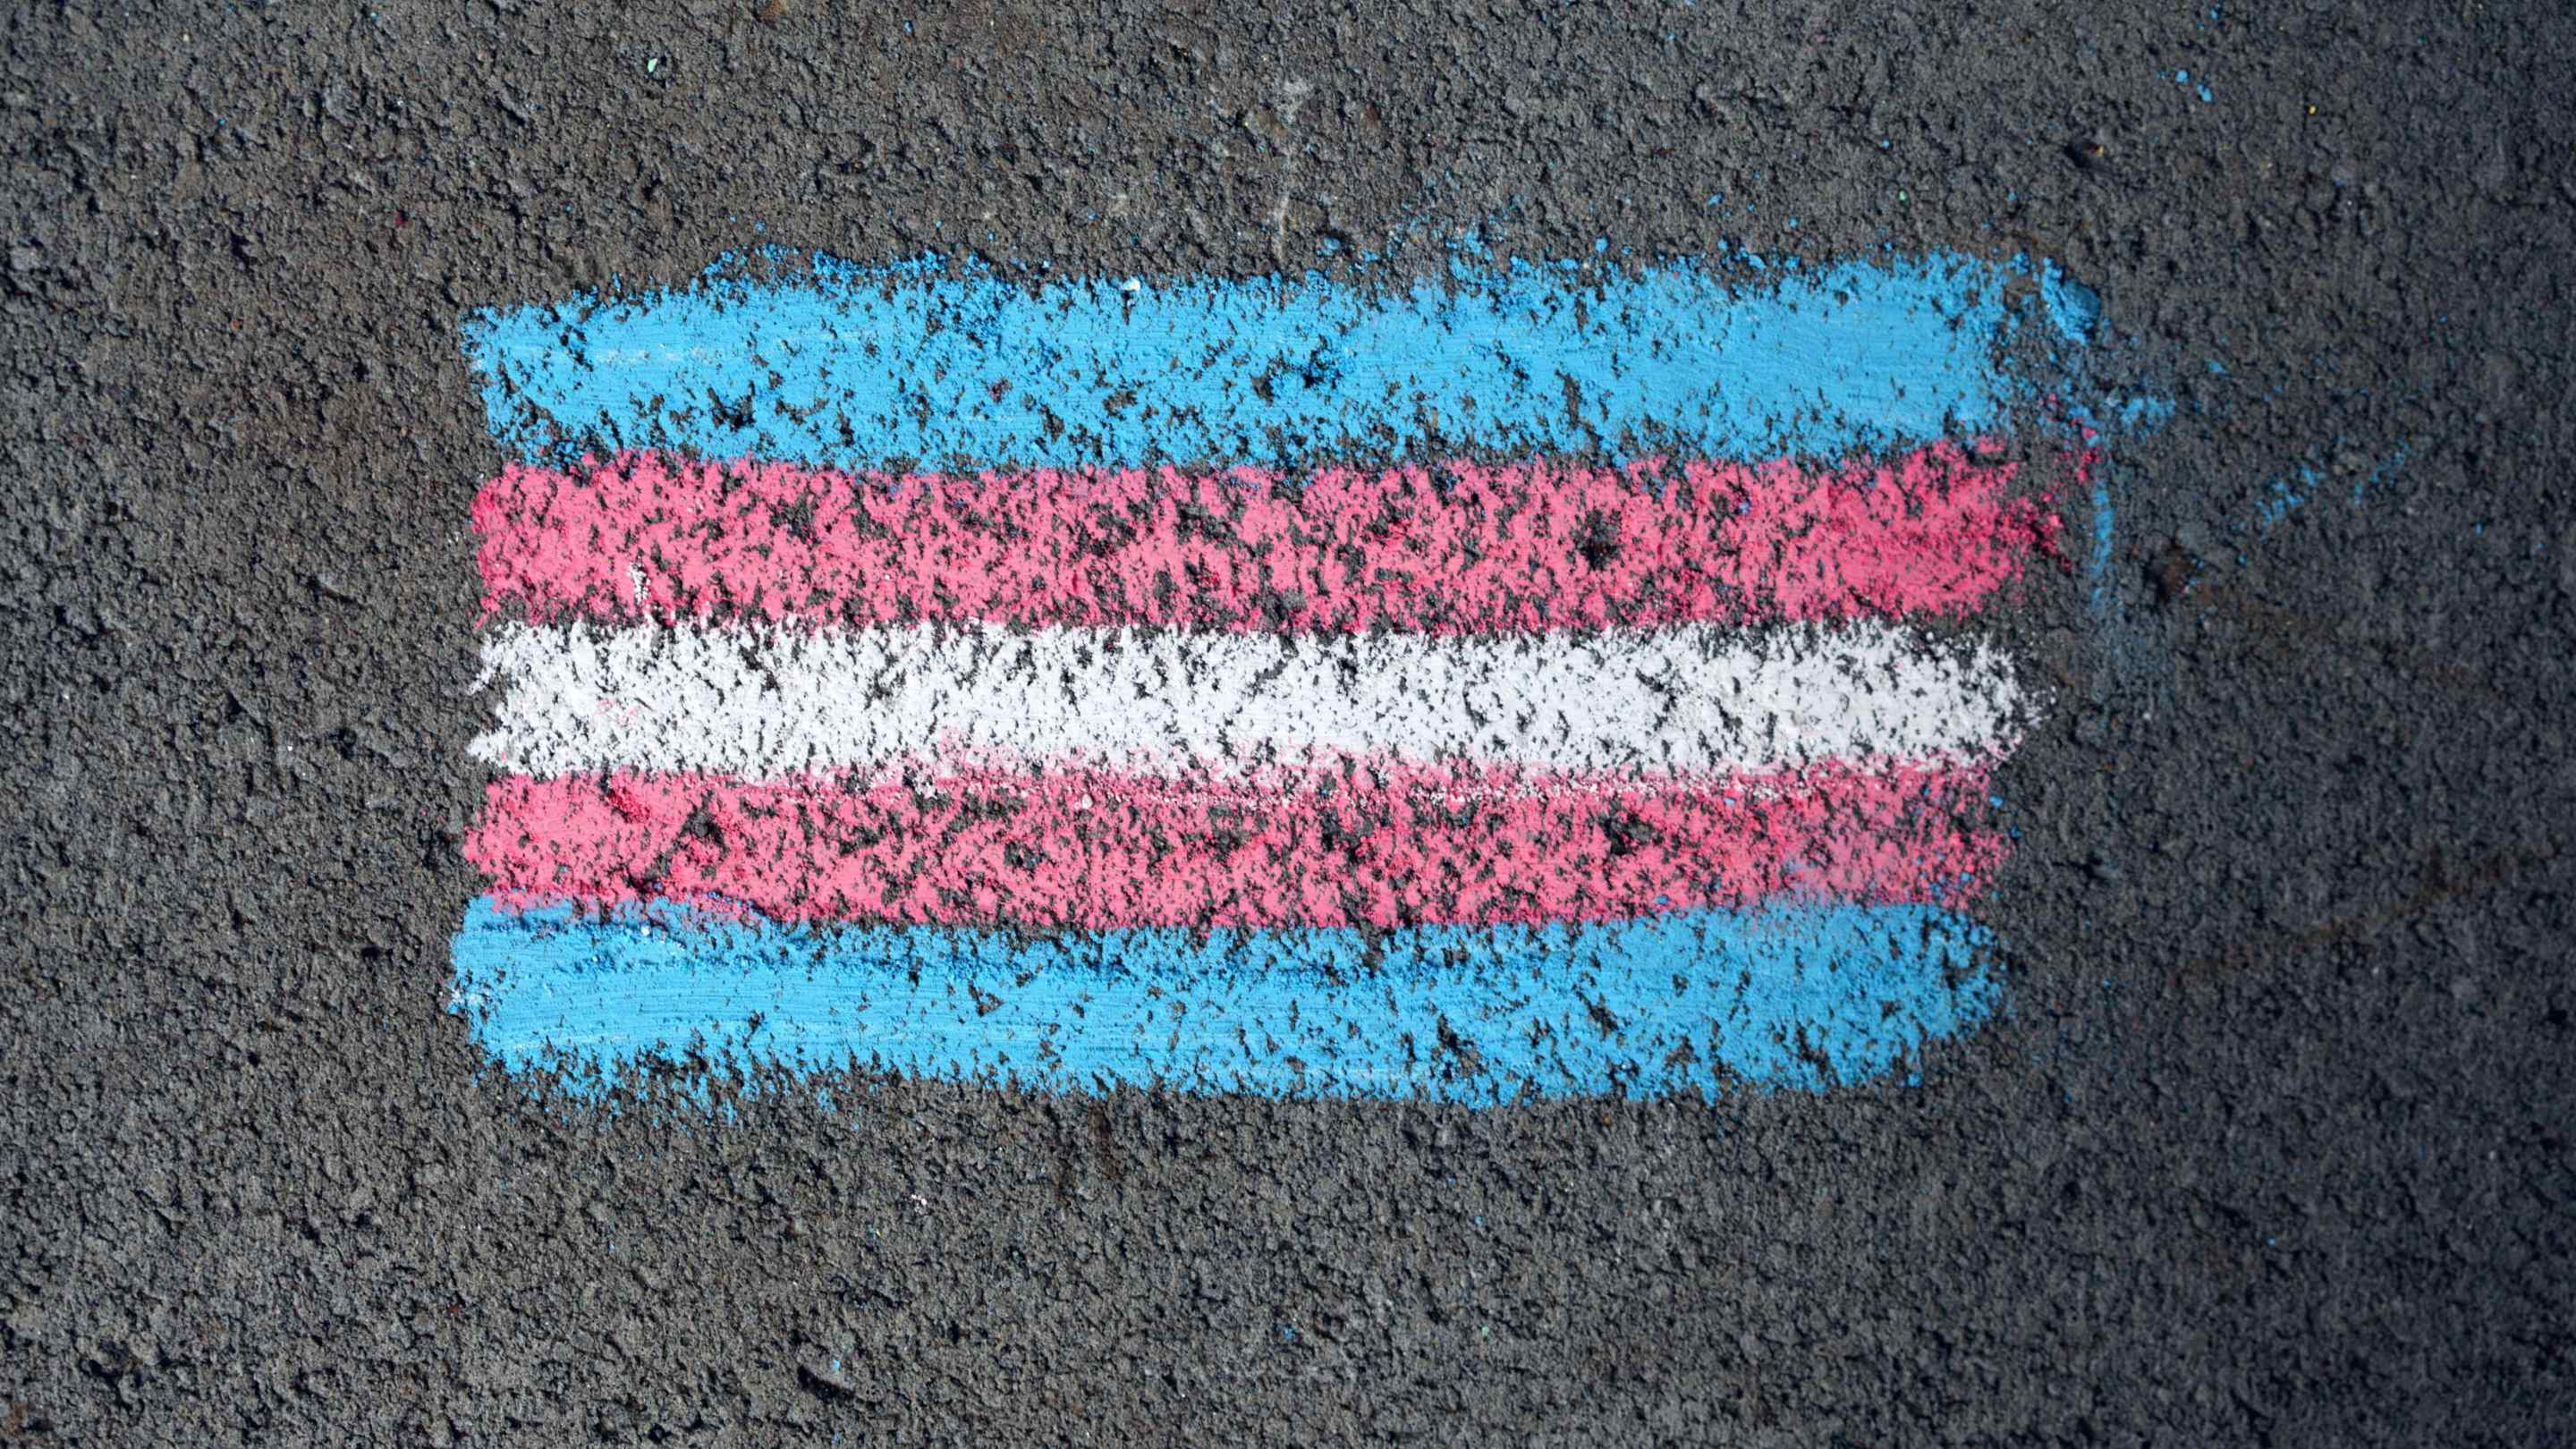 A trans flag, made of blue, pink, and white stripes, in chalk on black pavement